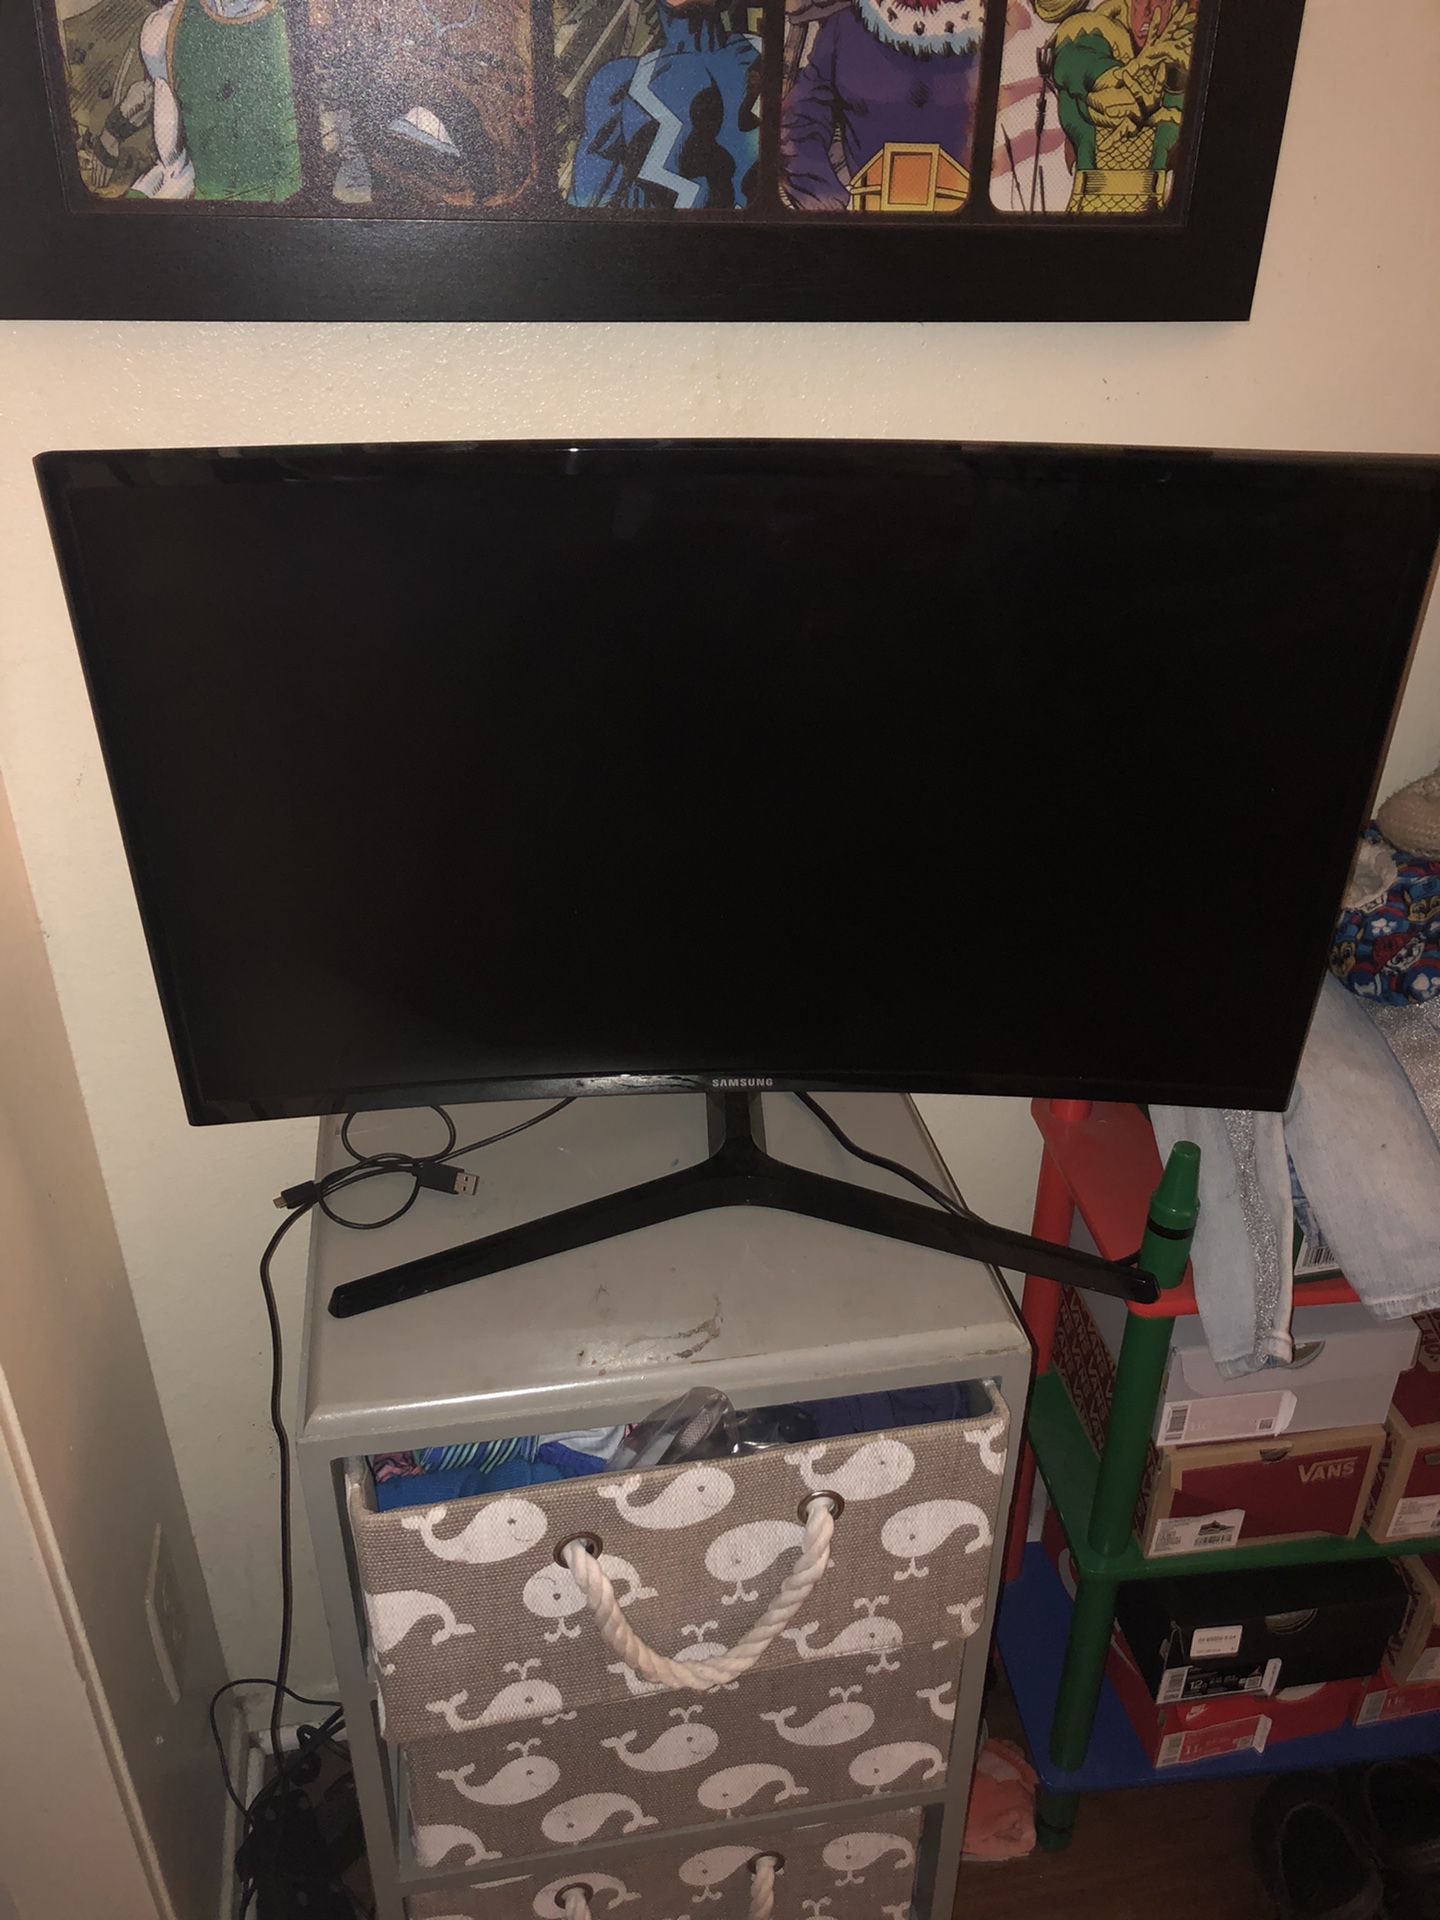 200 $ Samsung monitor 25 inches and its curved